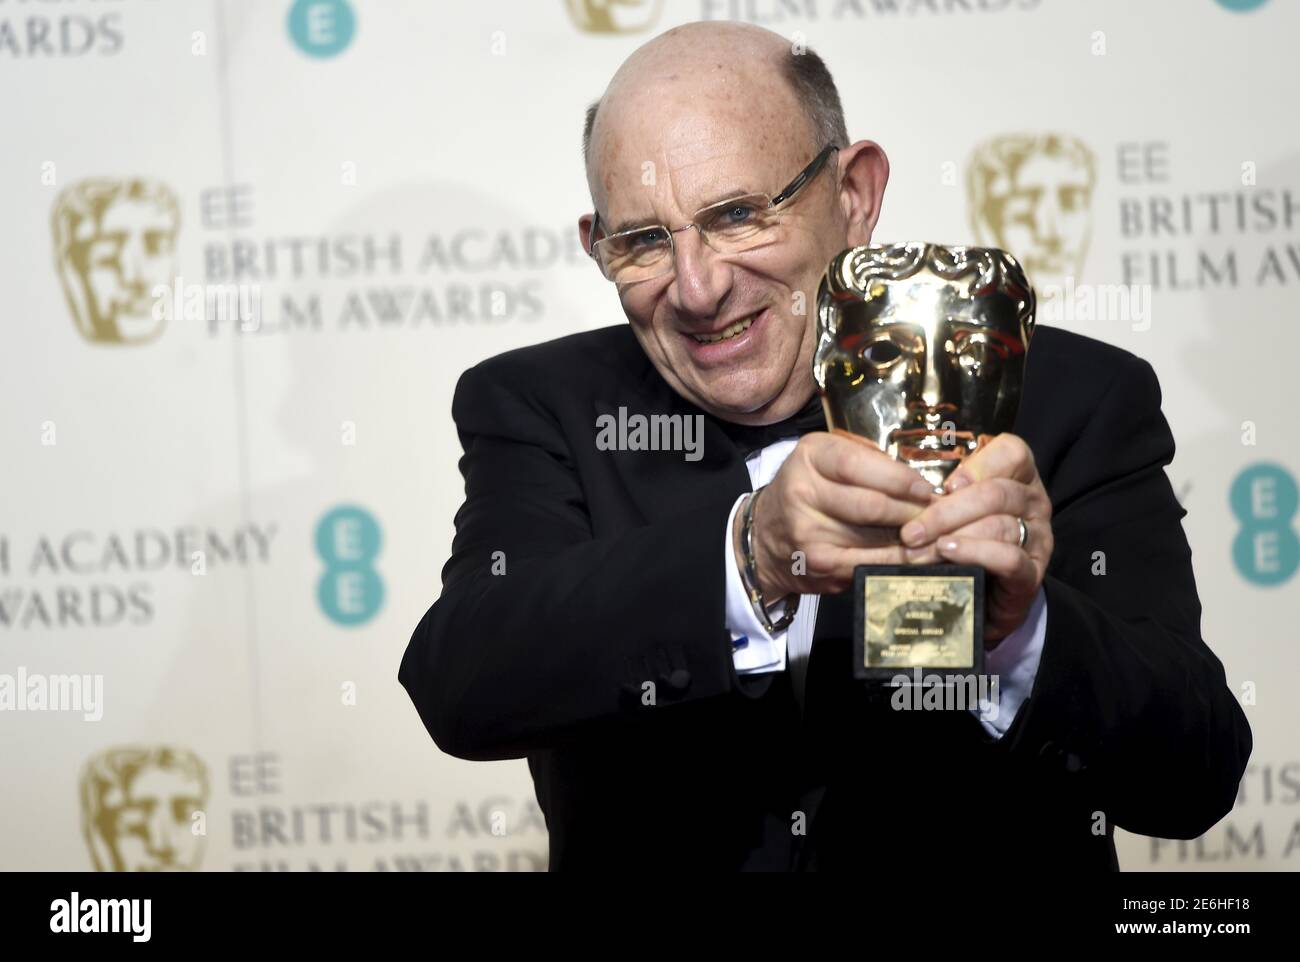 Tim Angel of Angels Costumes holds his award for outstanding contribution to British cinema at the British Academy of Film and Television Arts (BAFTA) Awards at the Royal Opera House in London, February 14, 2016. REUTERS/Toby Melville Stock Photo